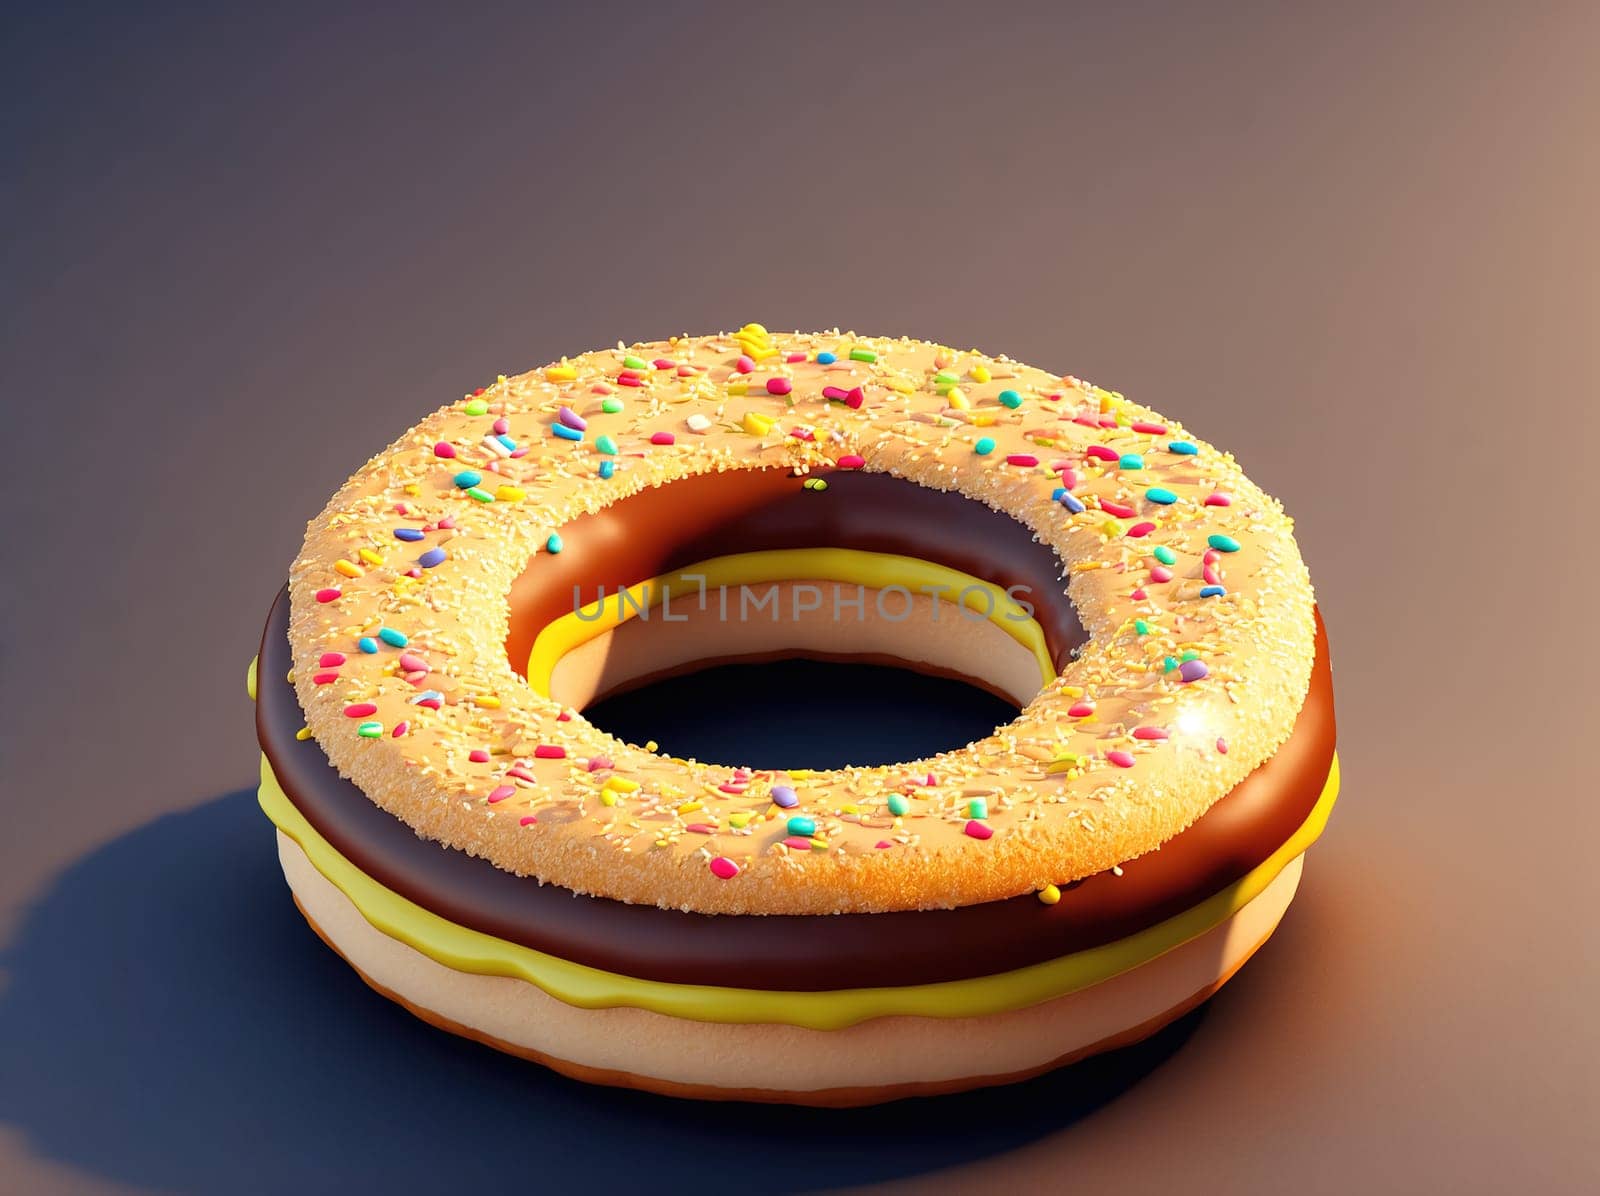 The image is a donut with sprinkles on it.